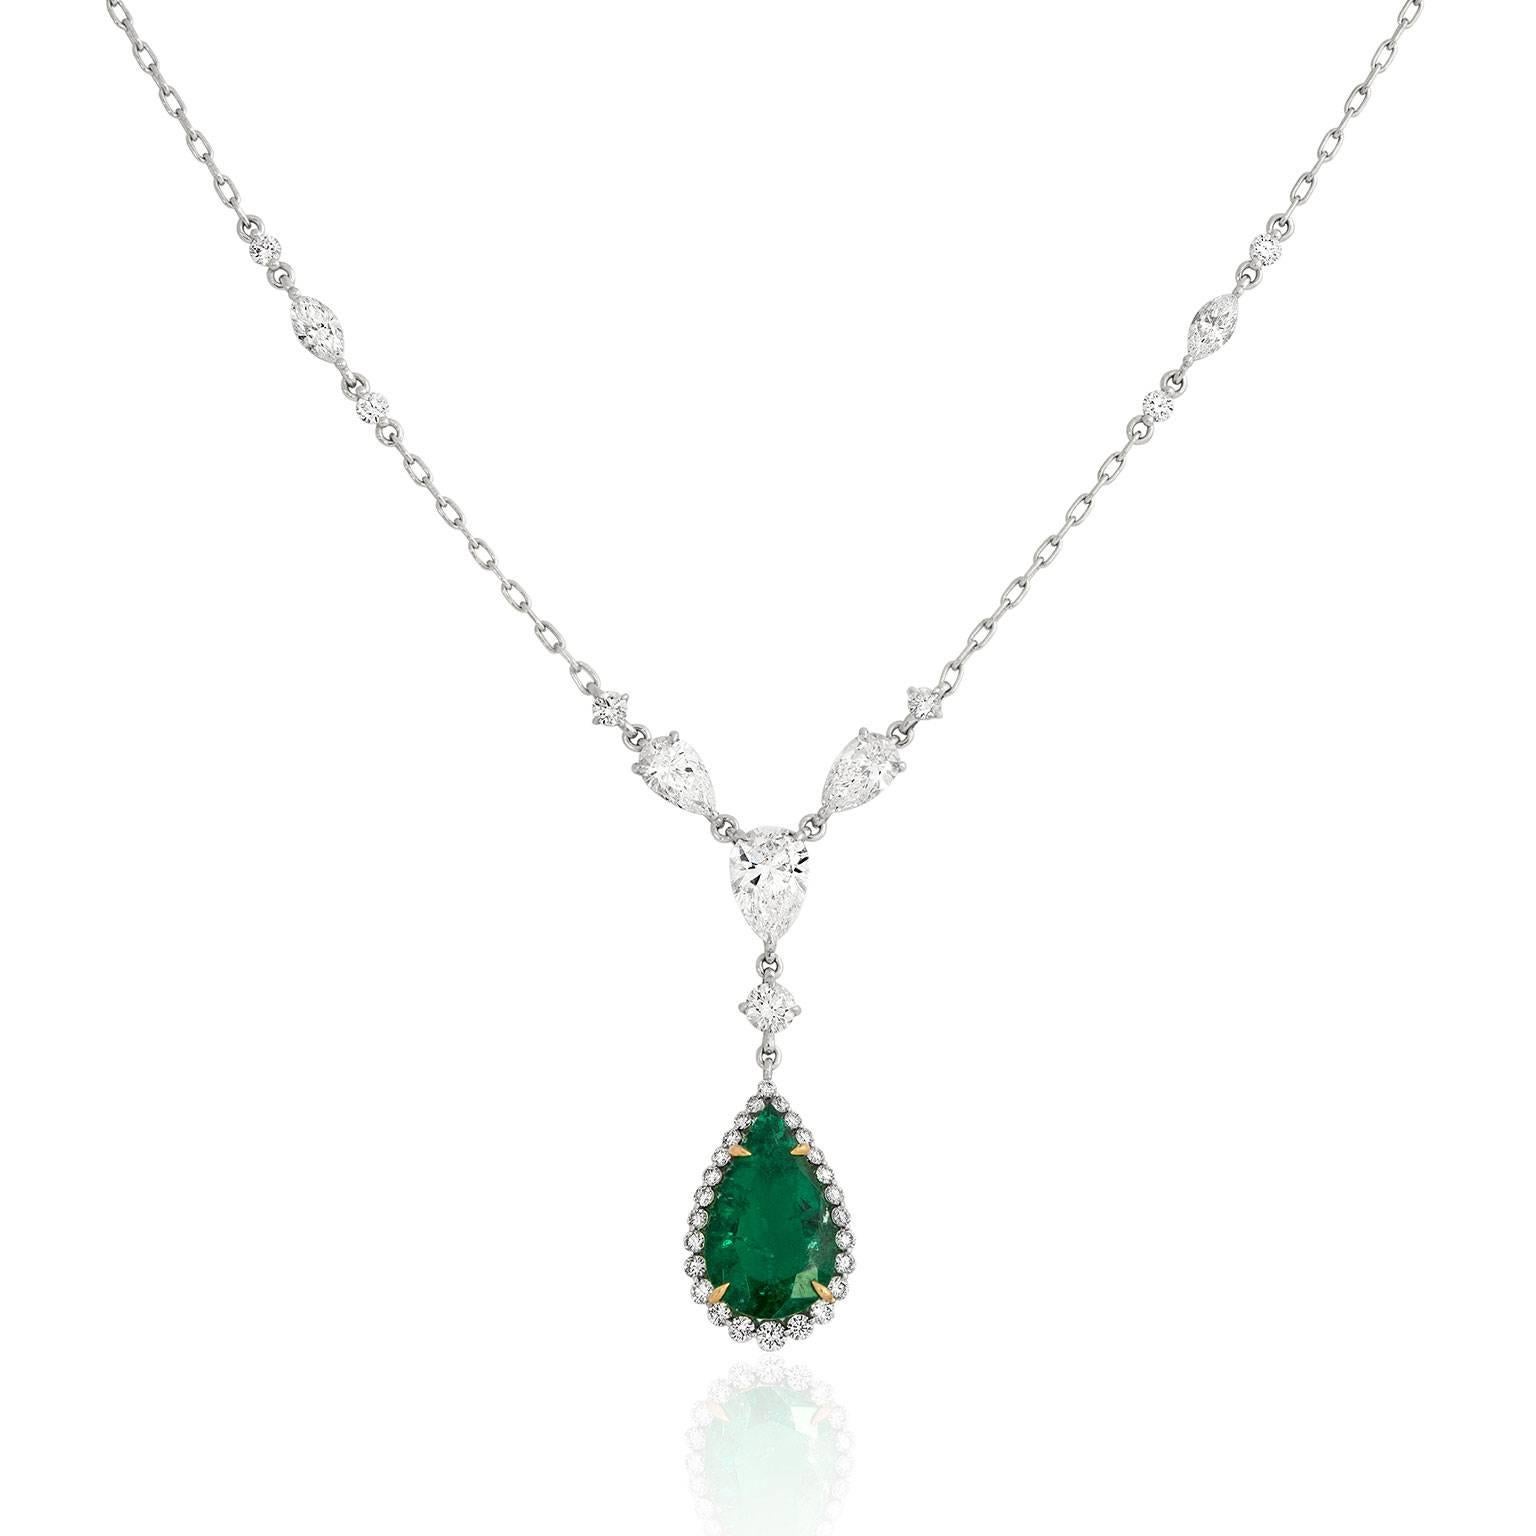 This exquisite Muzo emerald and diamond pendant is truly one of a kind. It is rare to come across an emerald of such outstanding beauty, clarity and vibrance; its mesmerising effect is enchanting. Worn on its own or perfectly matched with the Muzo